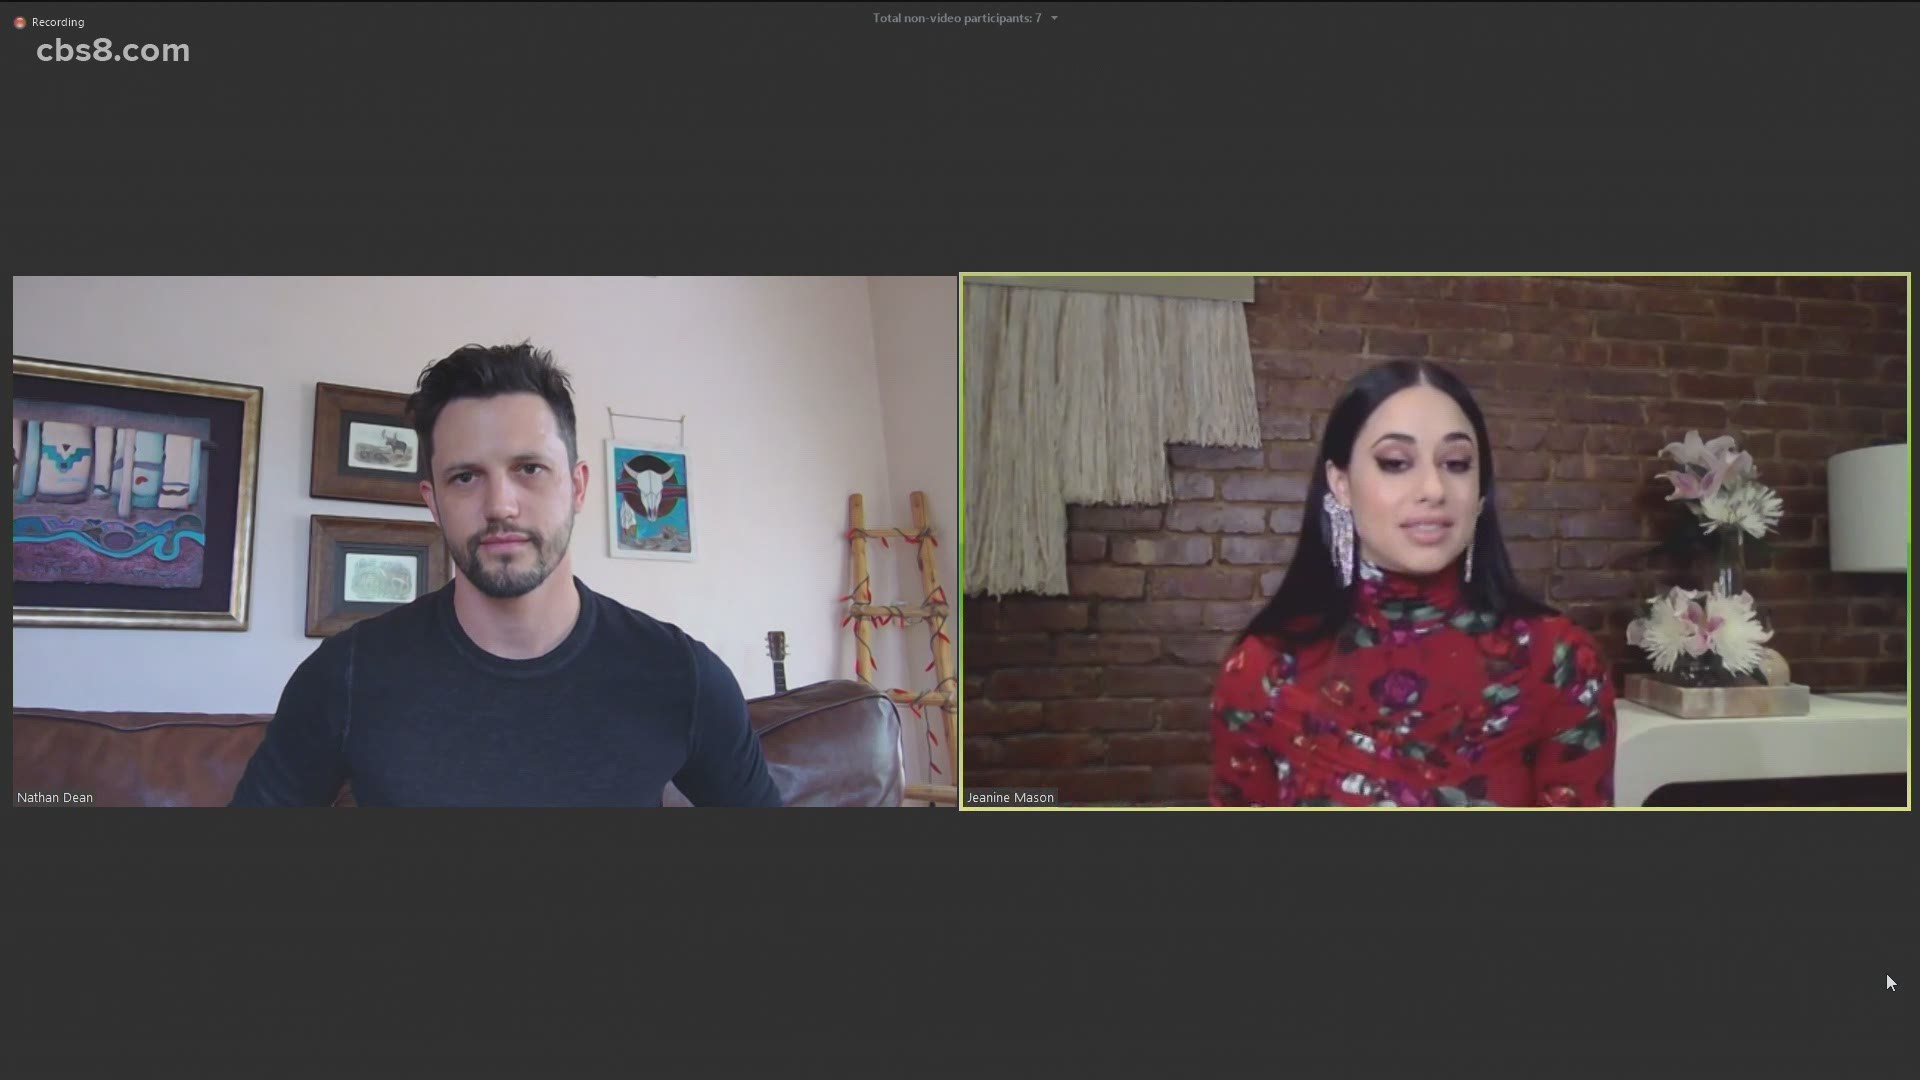 Stars of the show, Jeanine mason and Nathan Dean joined the show to talk about what viewers can expect from the new season.